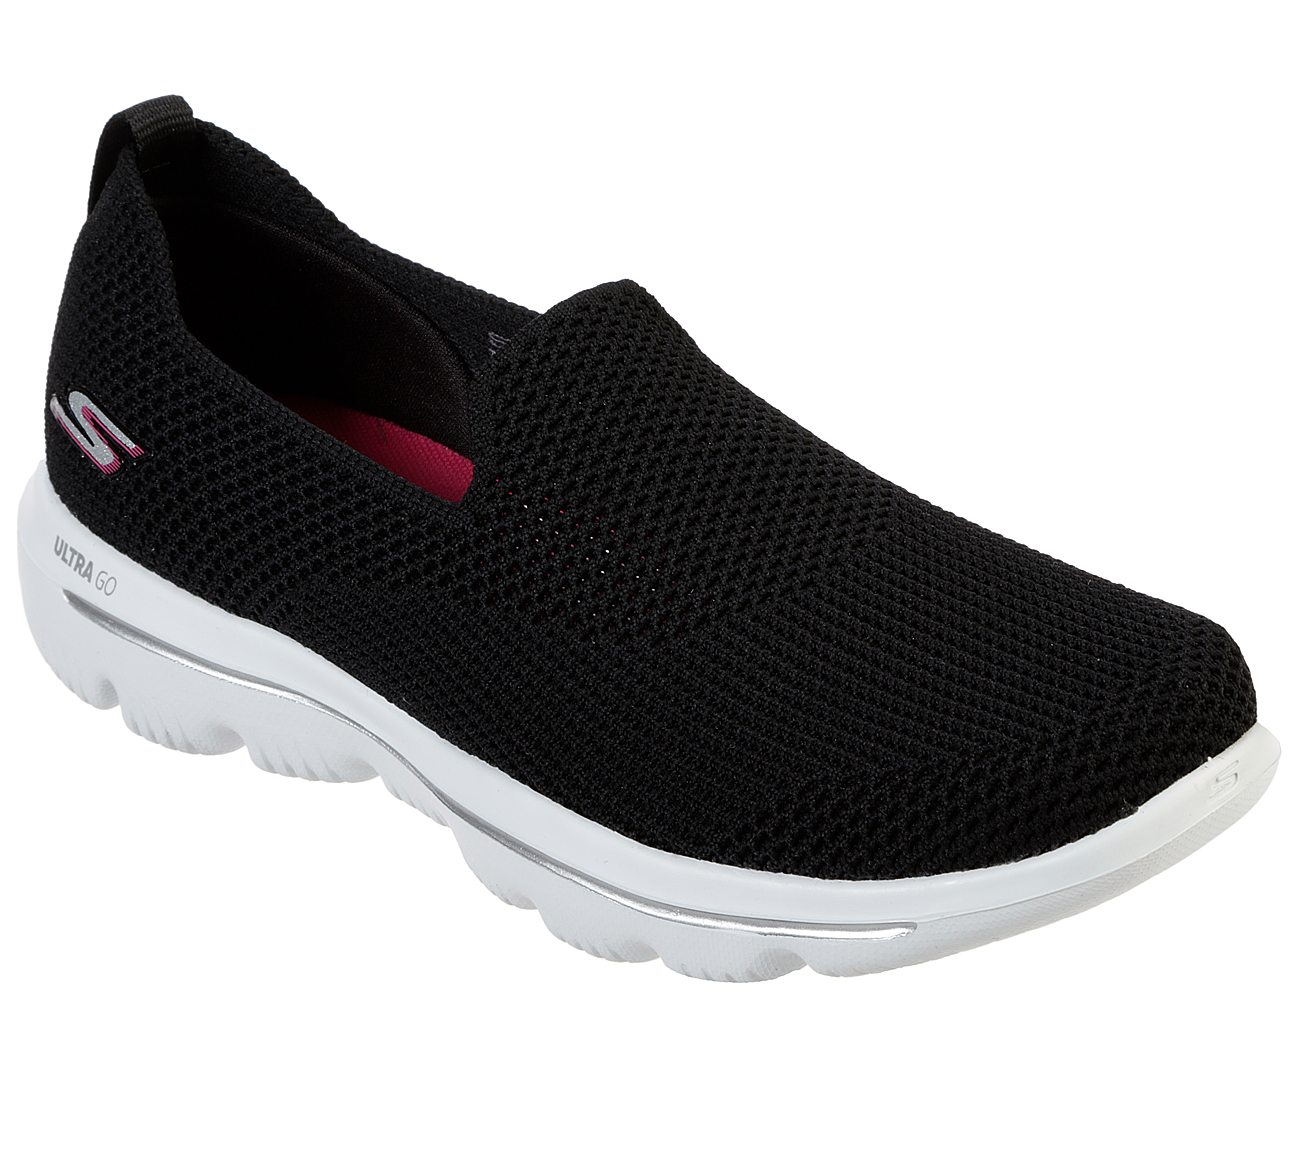 GO WALK EVOLUTION ULTRA-ENDLE, BLACK/WHITE Footwear Lateral View